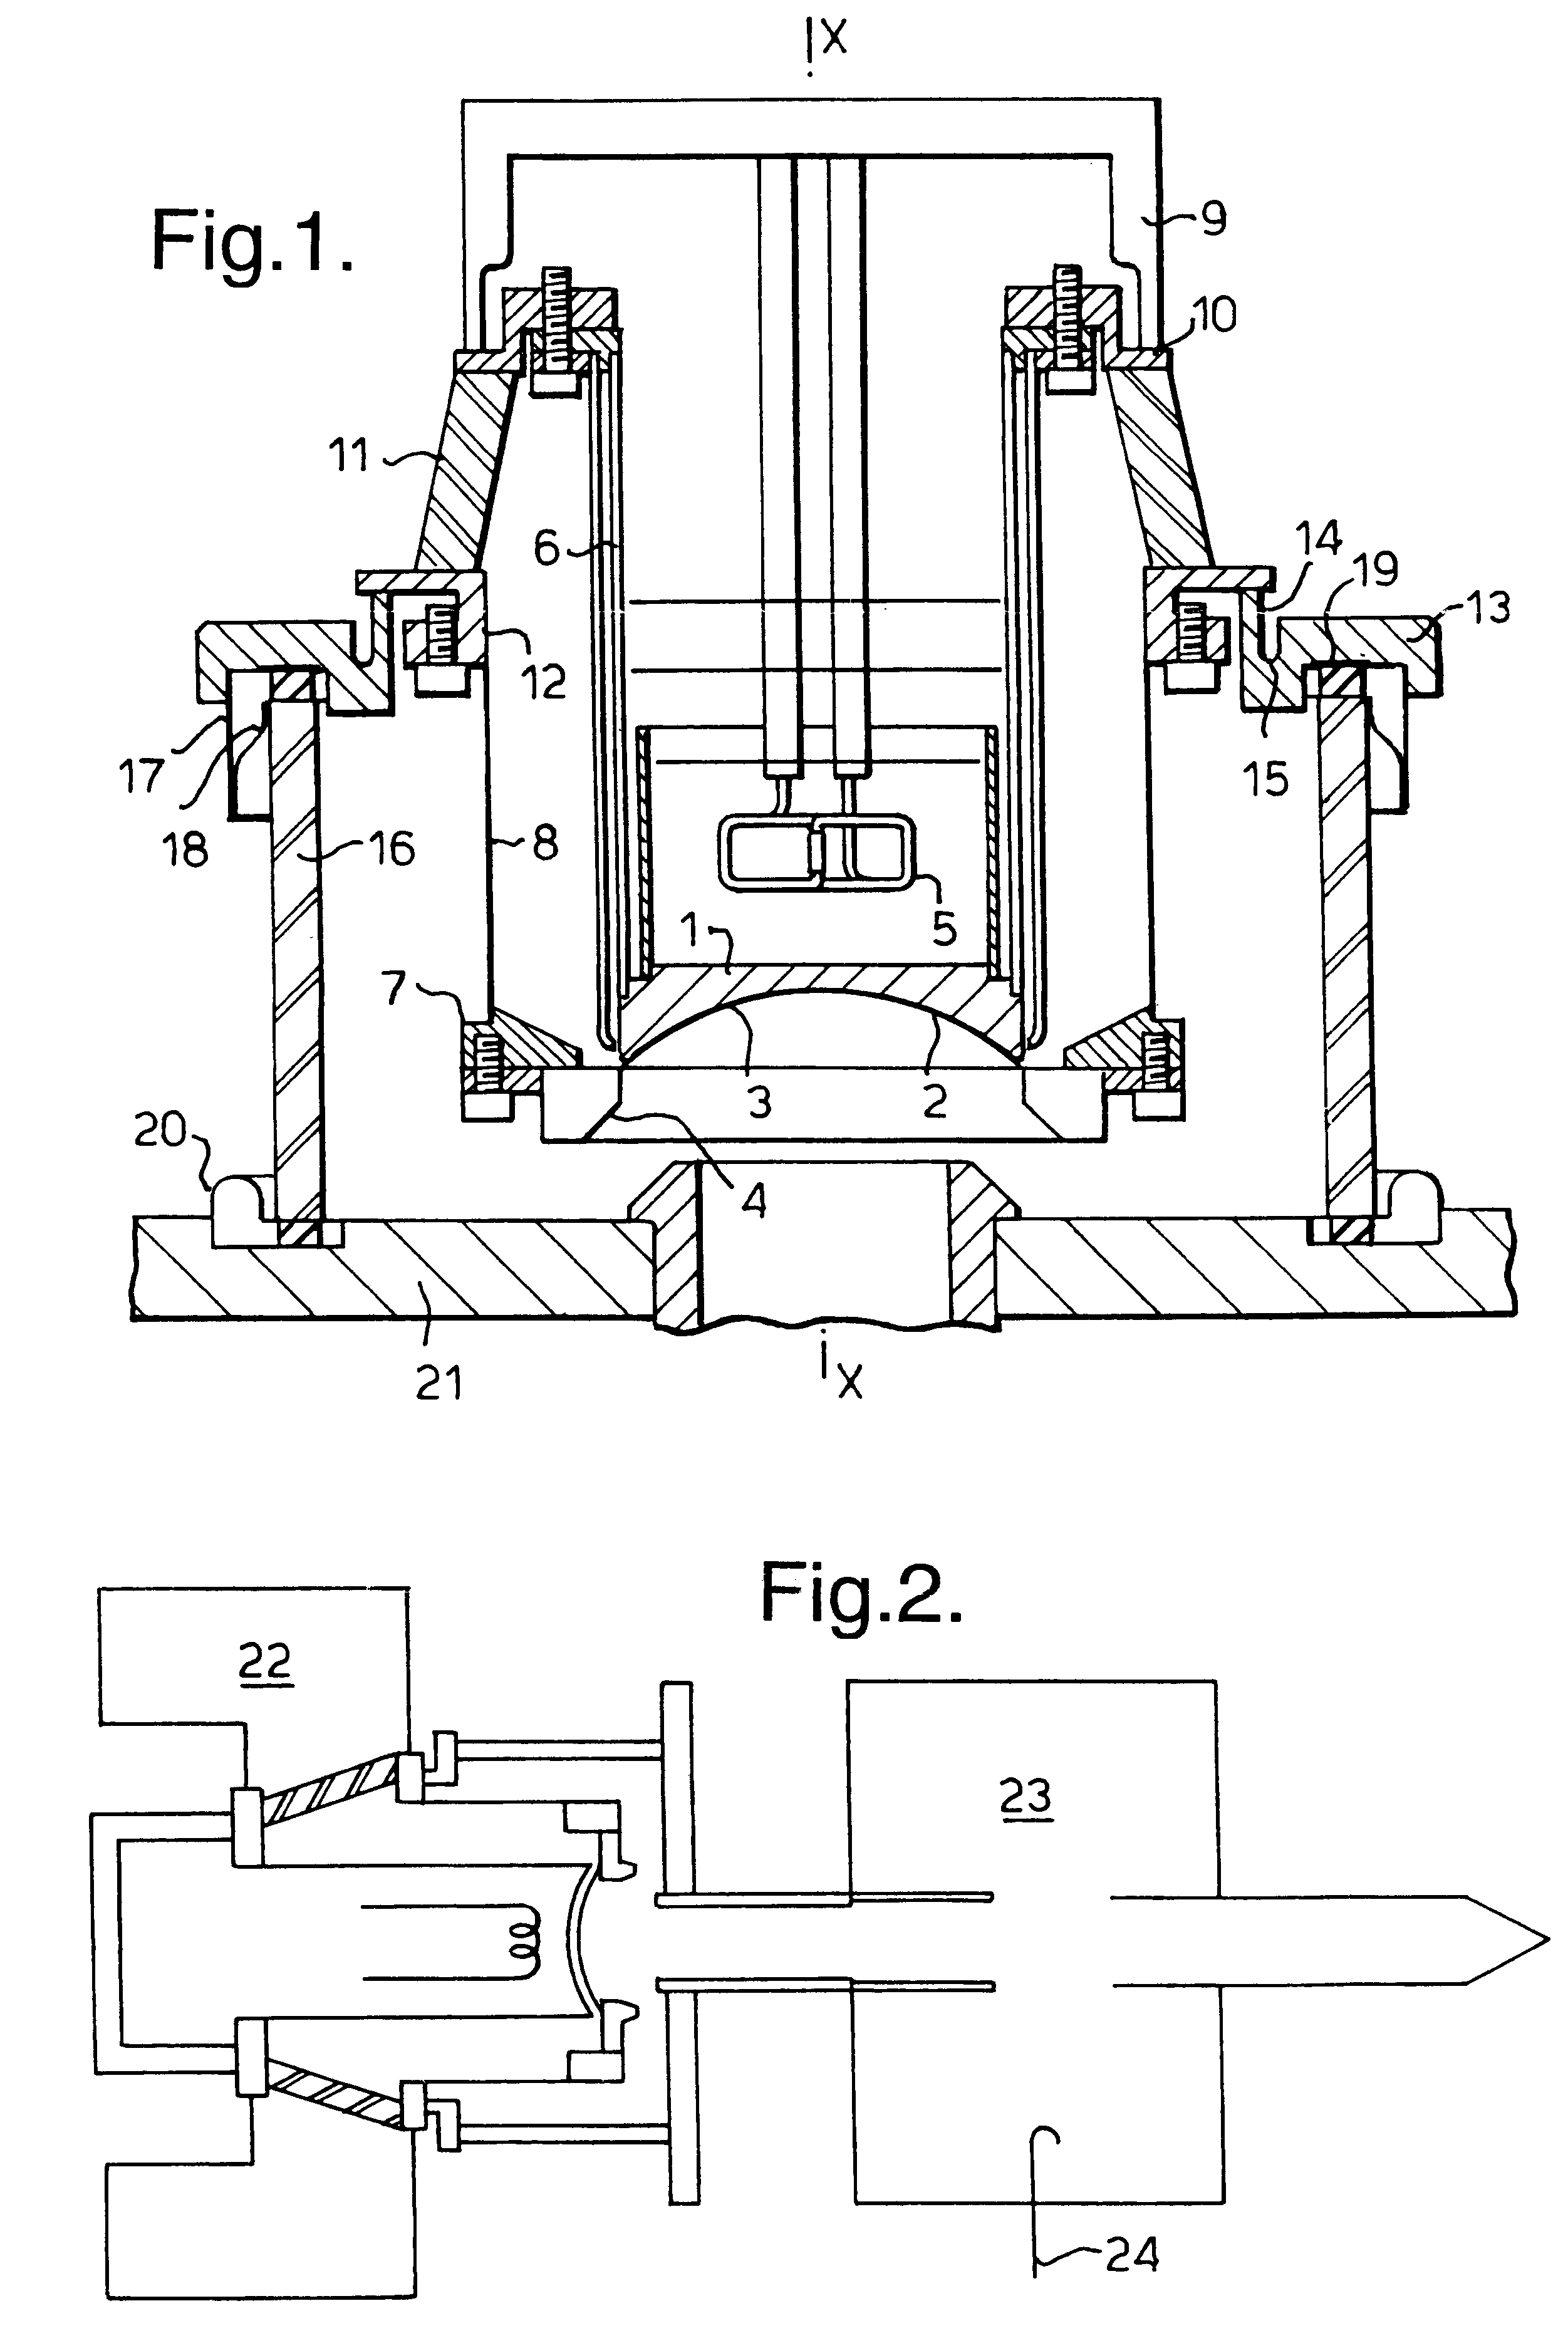 Electron gun arrangements having closely spaced cathode and electrode and a vacuum seal